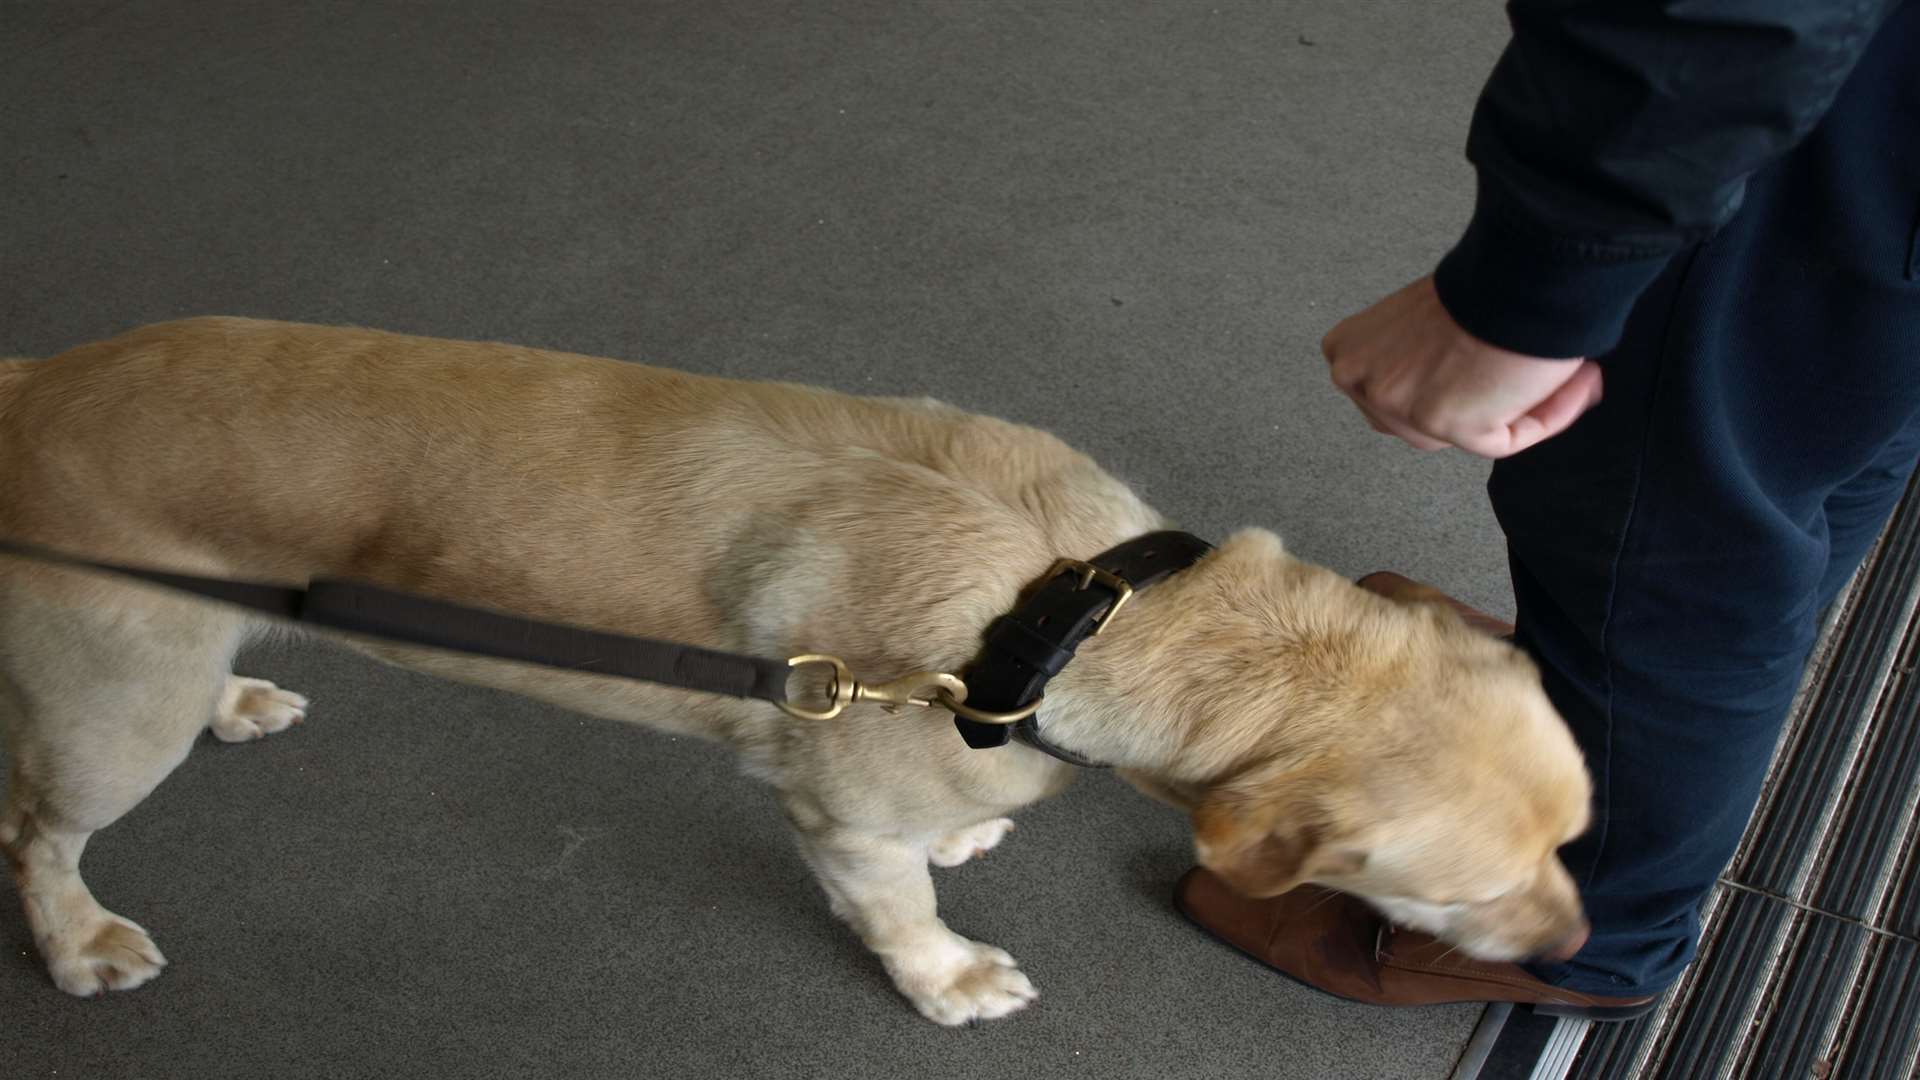 A police sniffer dog at work.